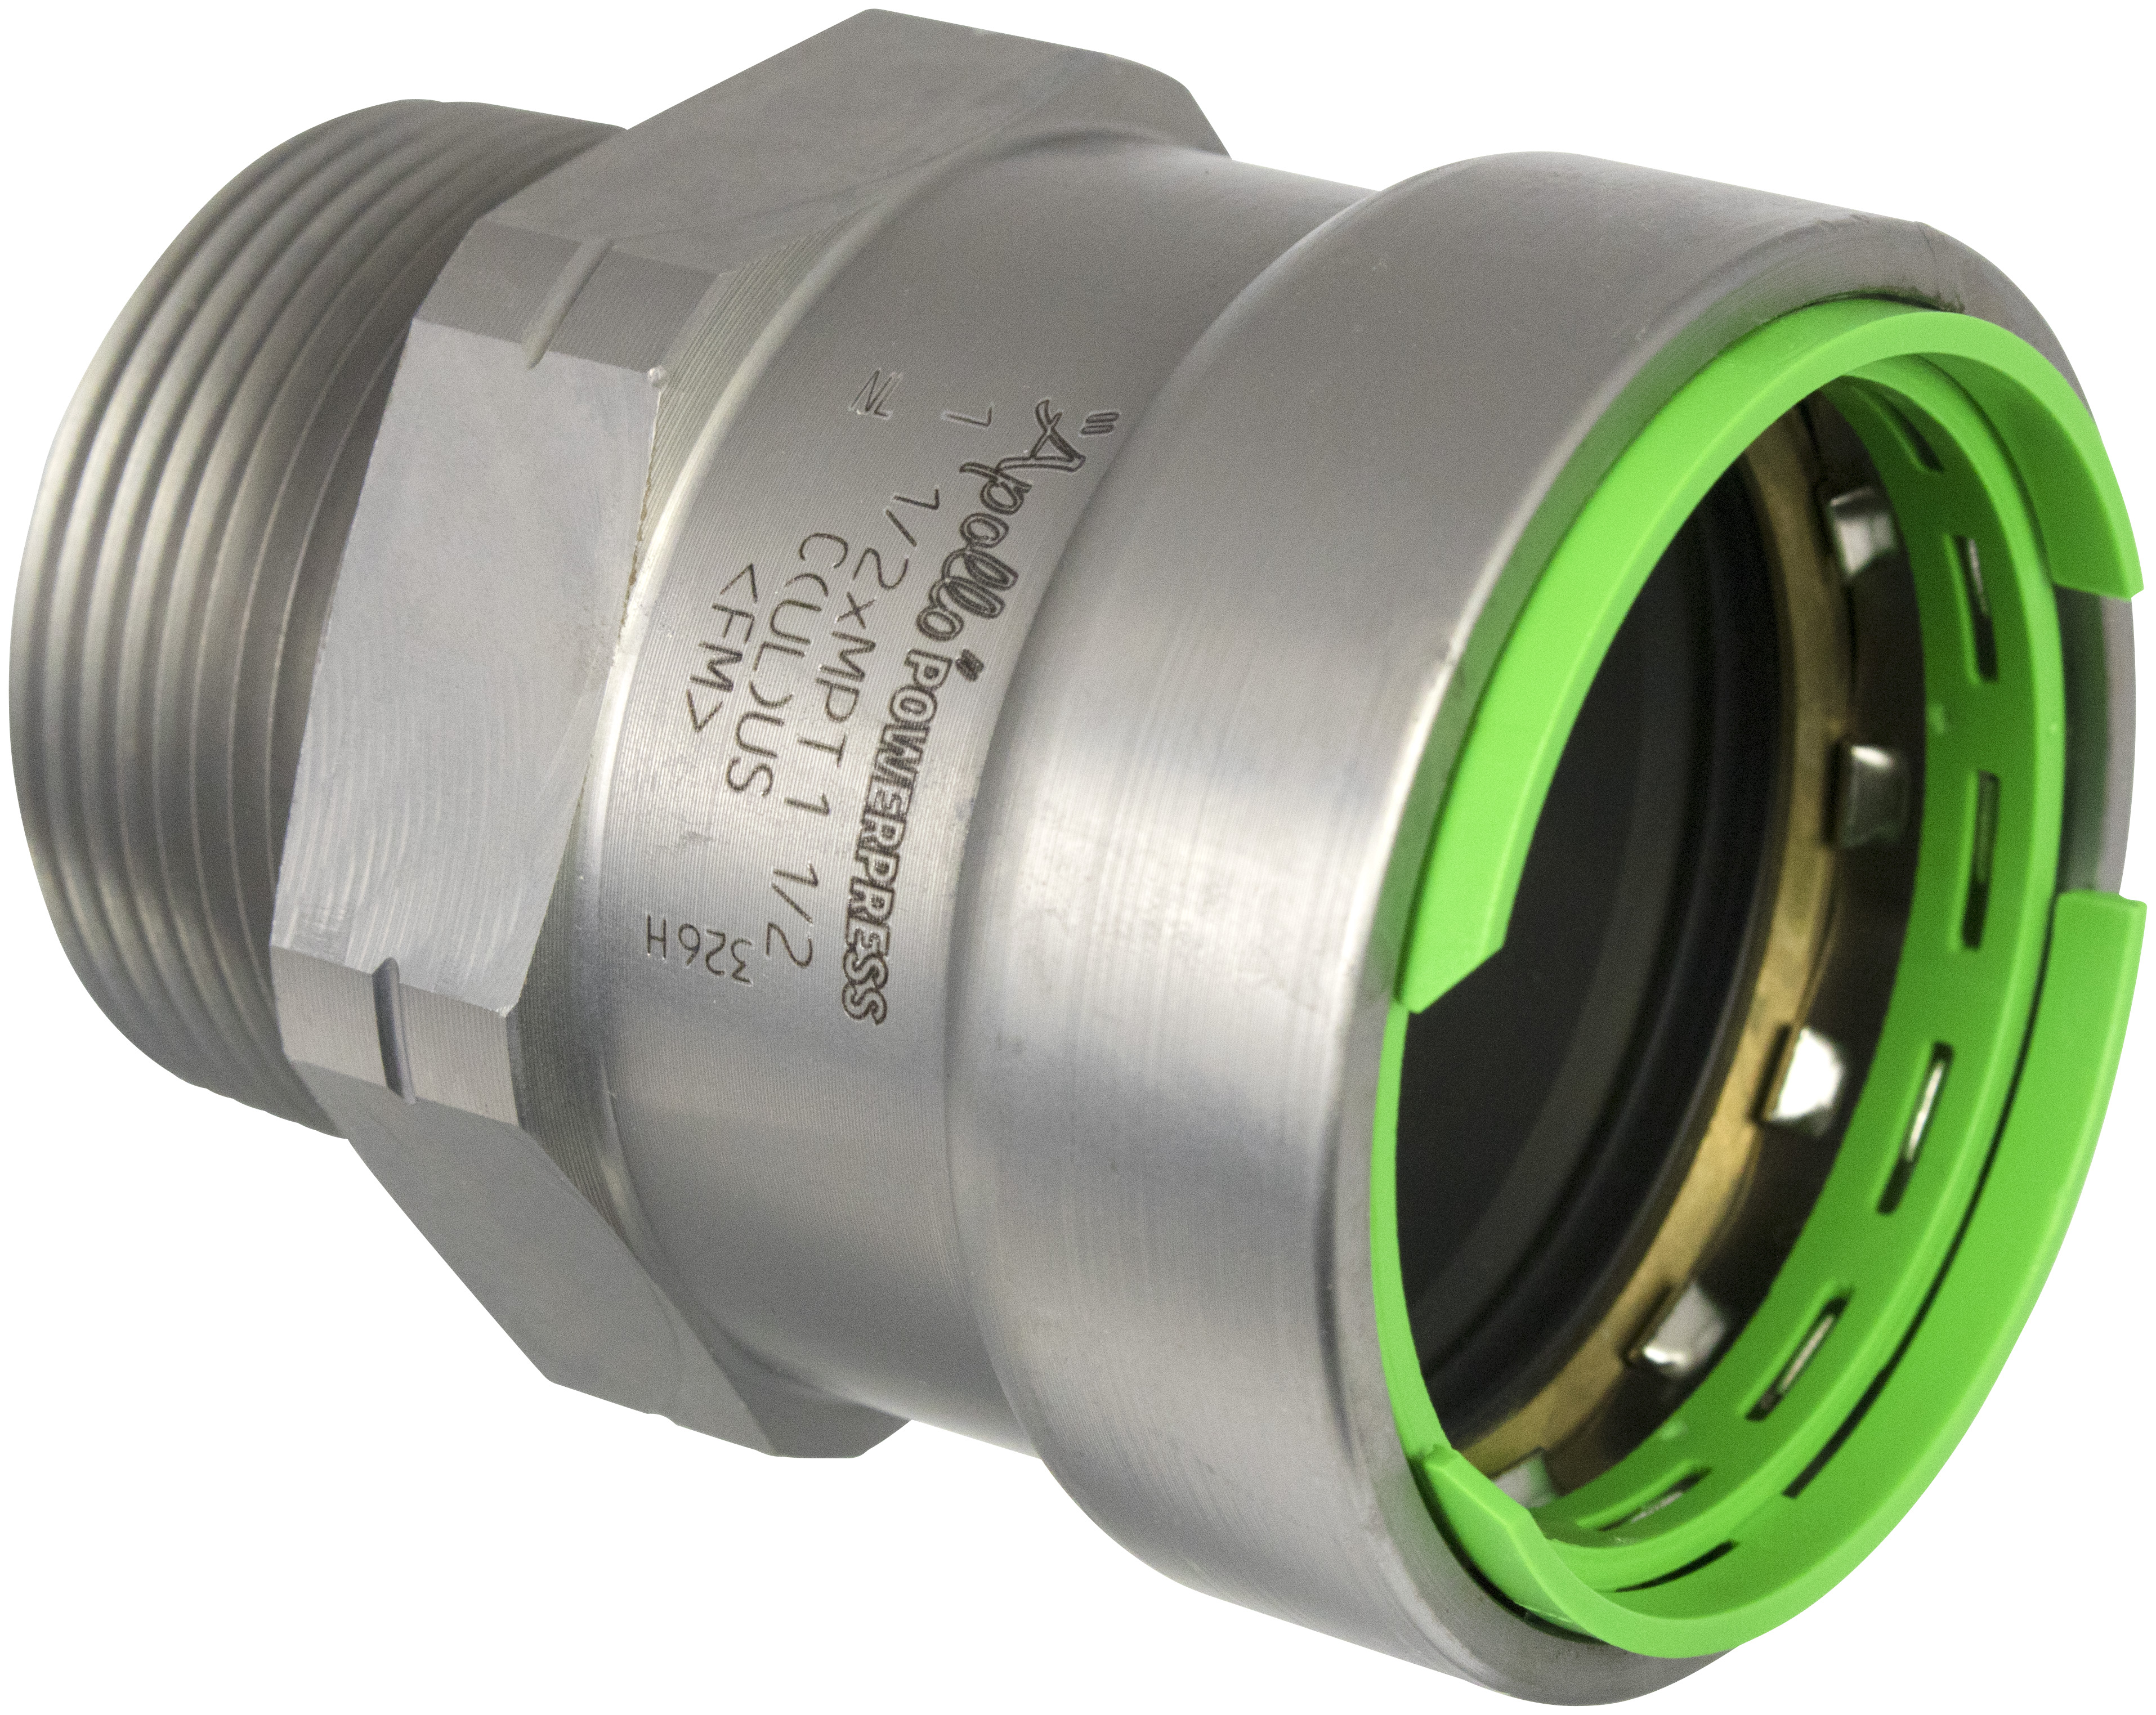 1 APOLLO POWERPRESS ADAPTER - MALE -  P X MPT -  1 -  CARBON STEEL (ZNNI COATED) -  EPDM SEALING ELEMENT -  VISUAL CONTROL RING TECHNOLOGY (GREEN) -  MODEL NO. 404